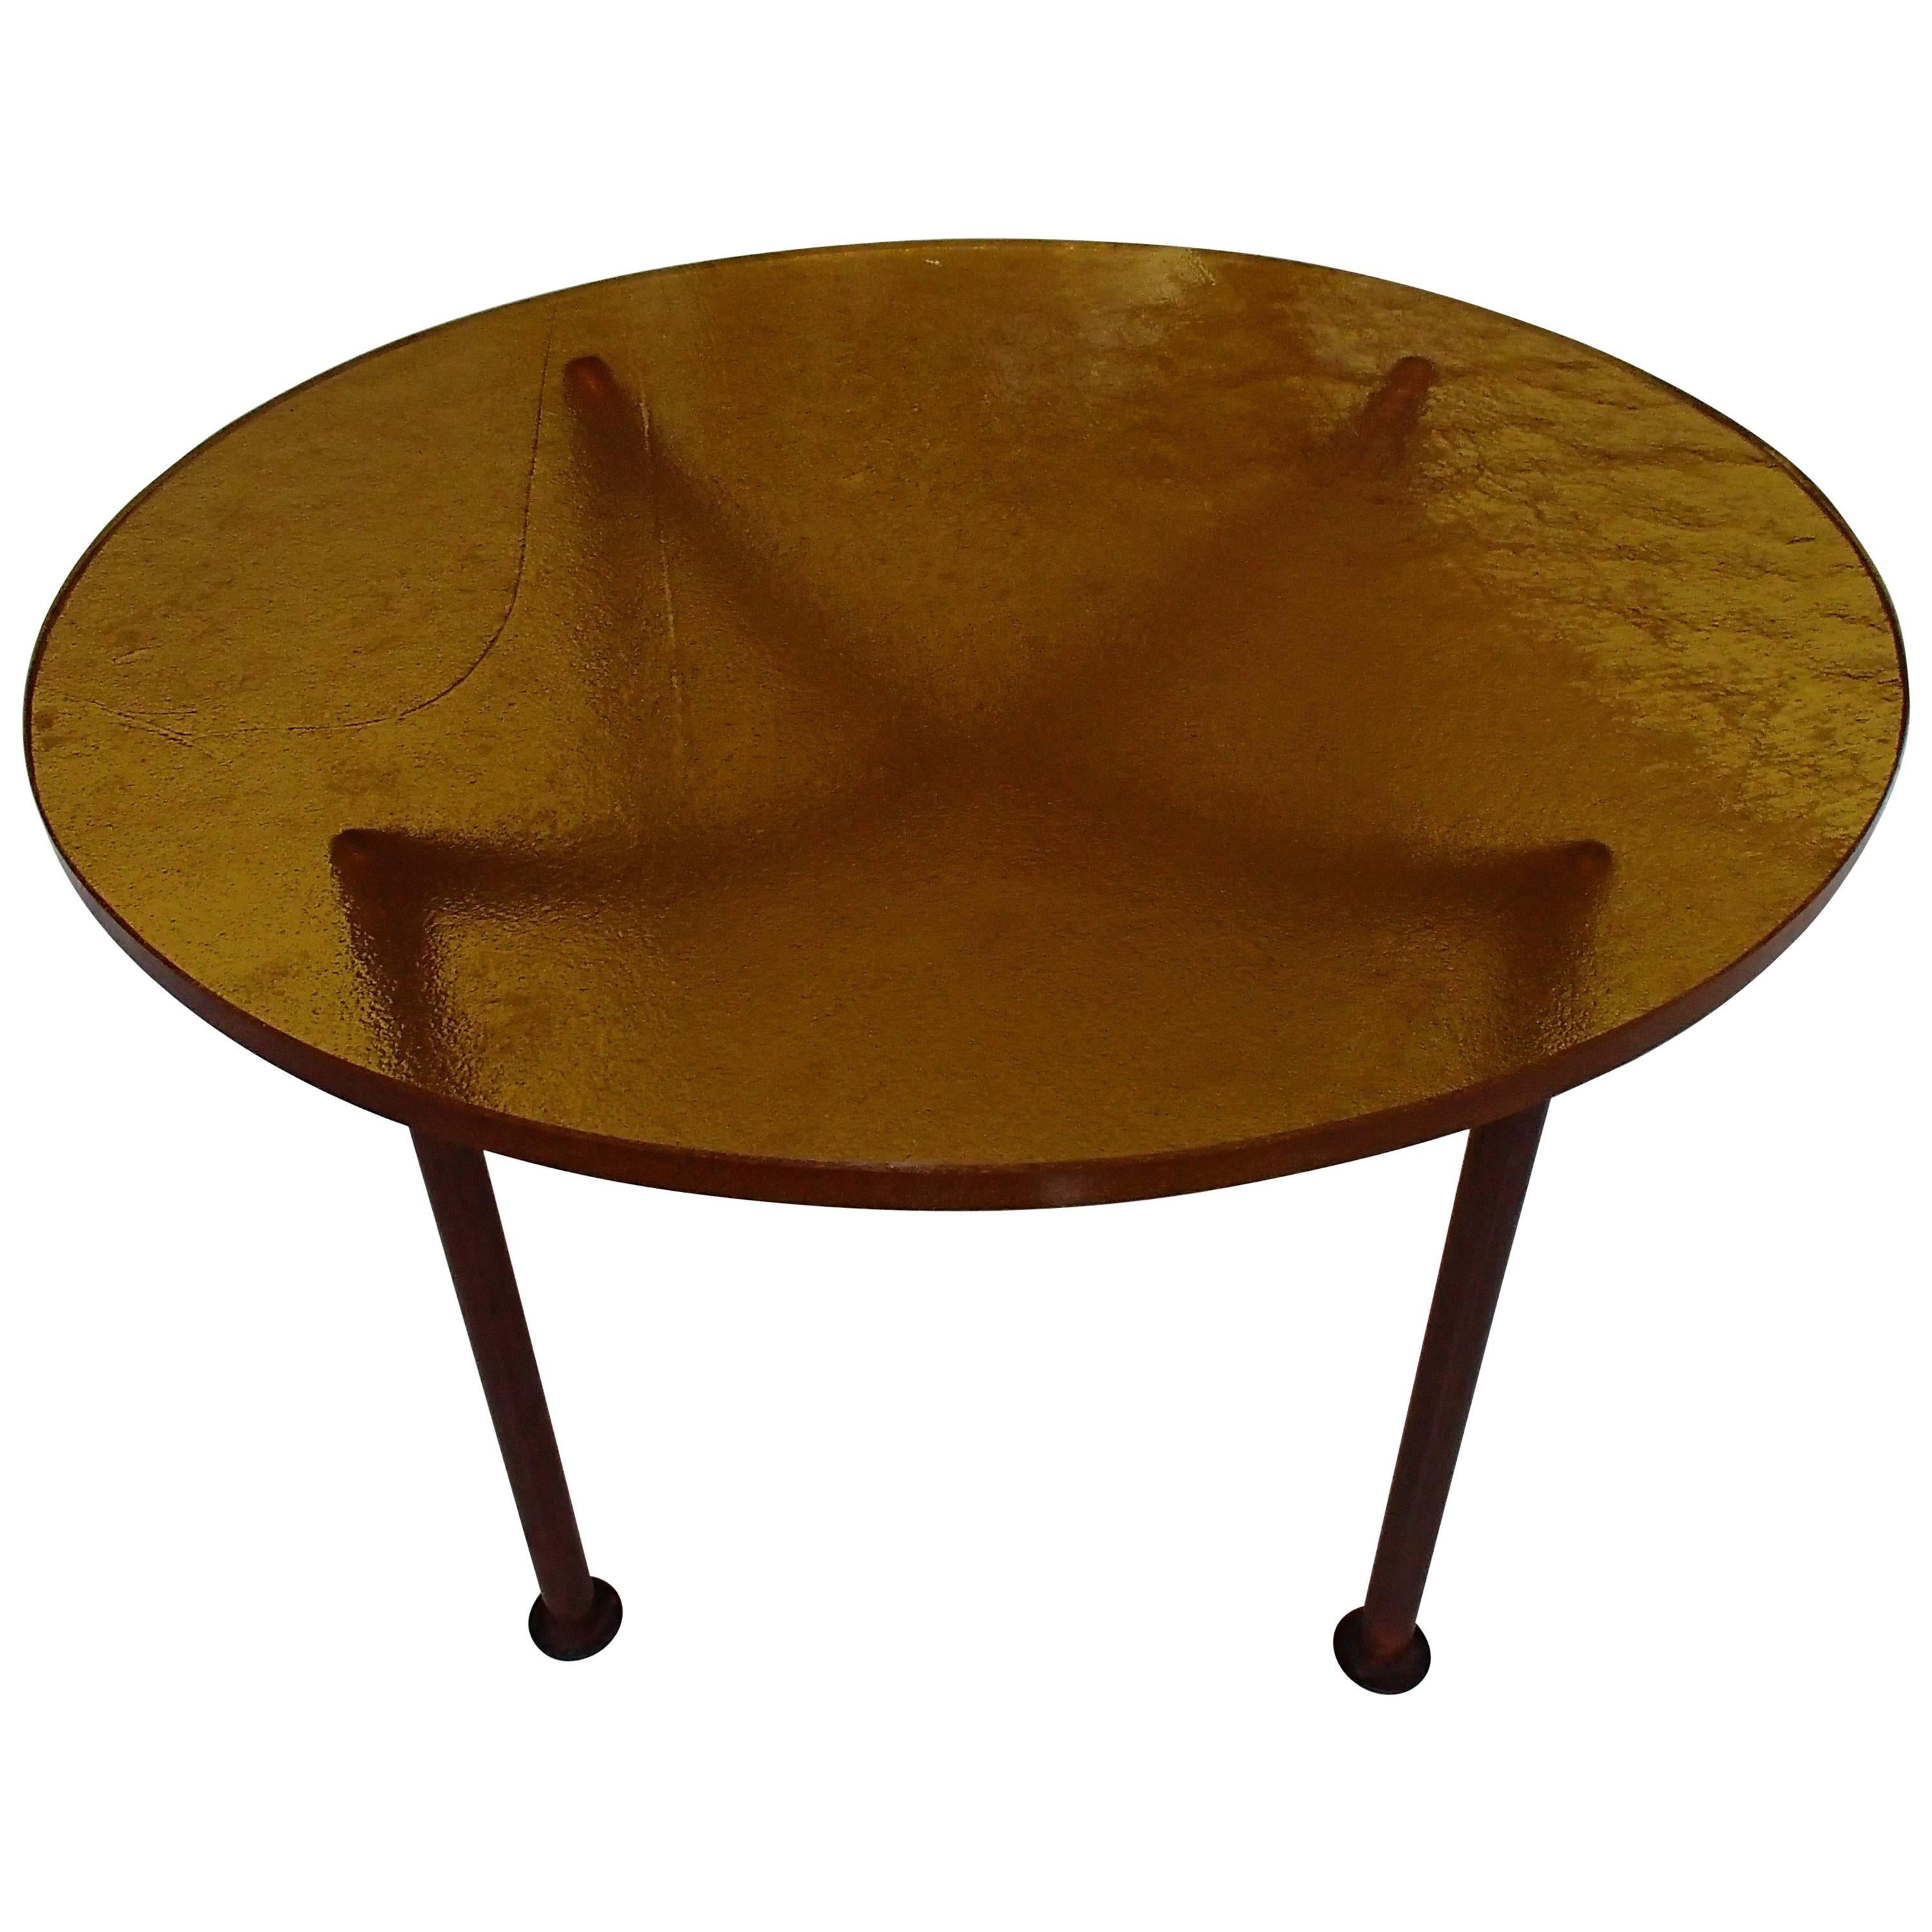 Art Deco Coffee Table Thick Yellow Orange Glasstop on Cubistic Copper Legs